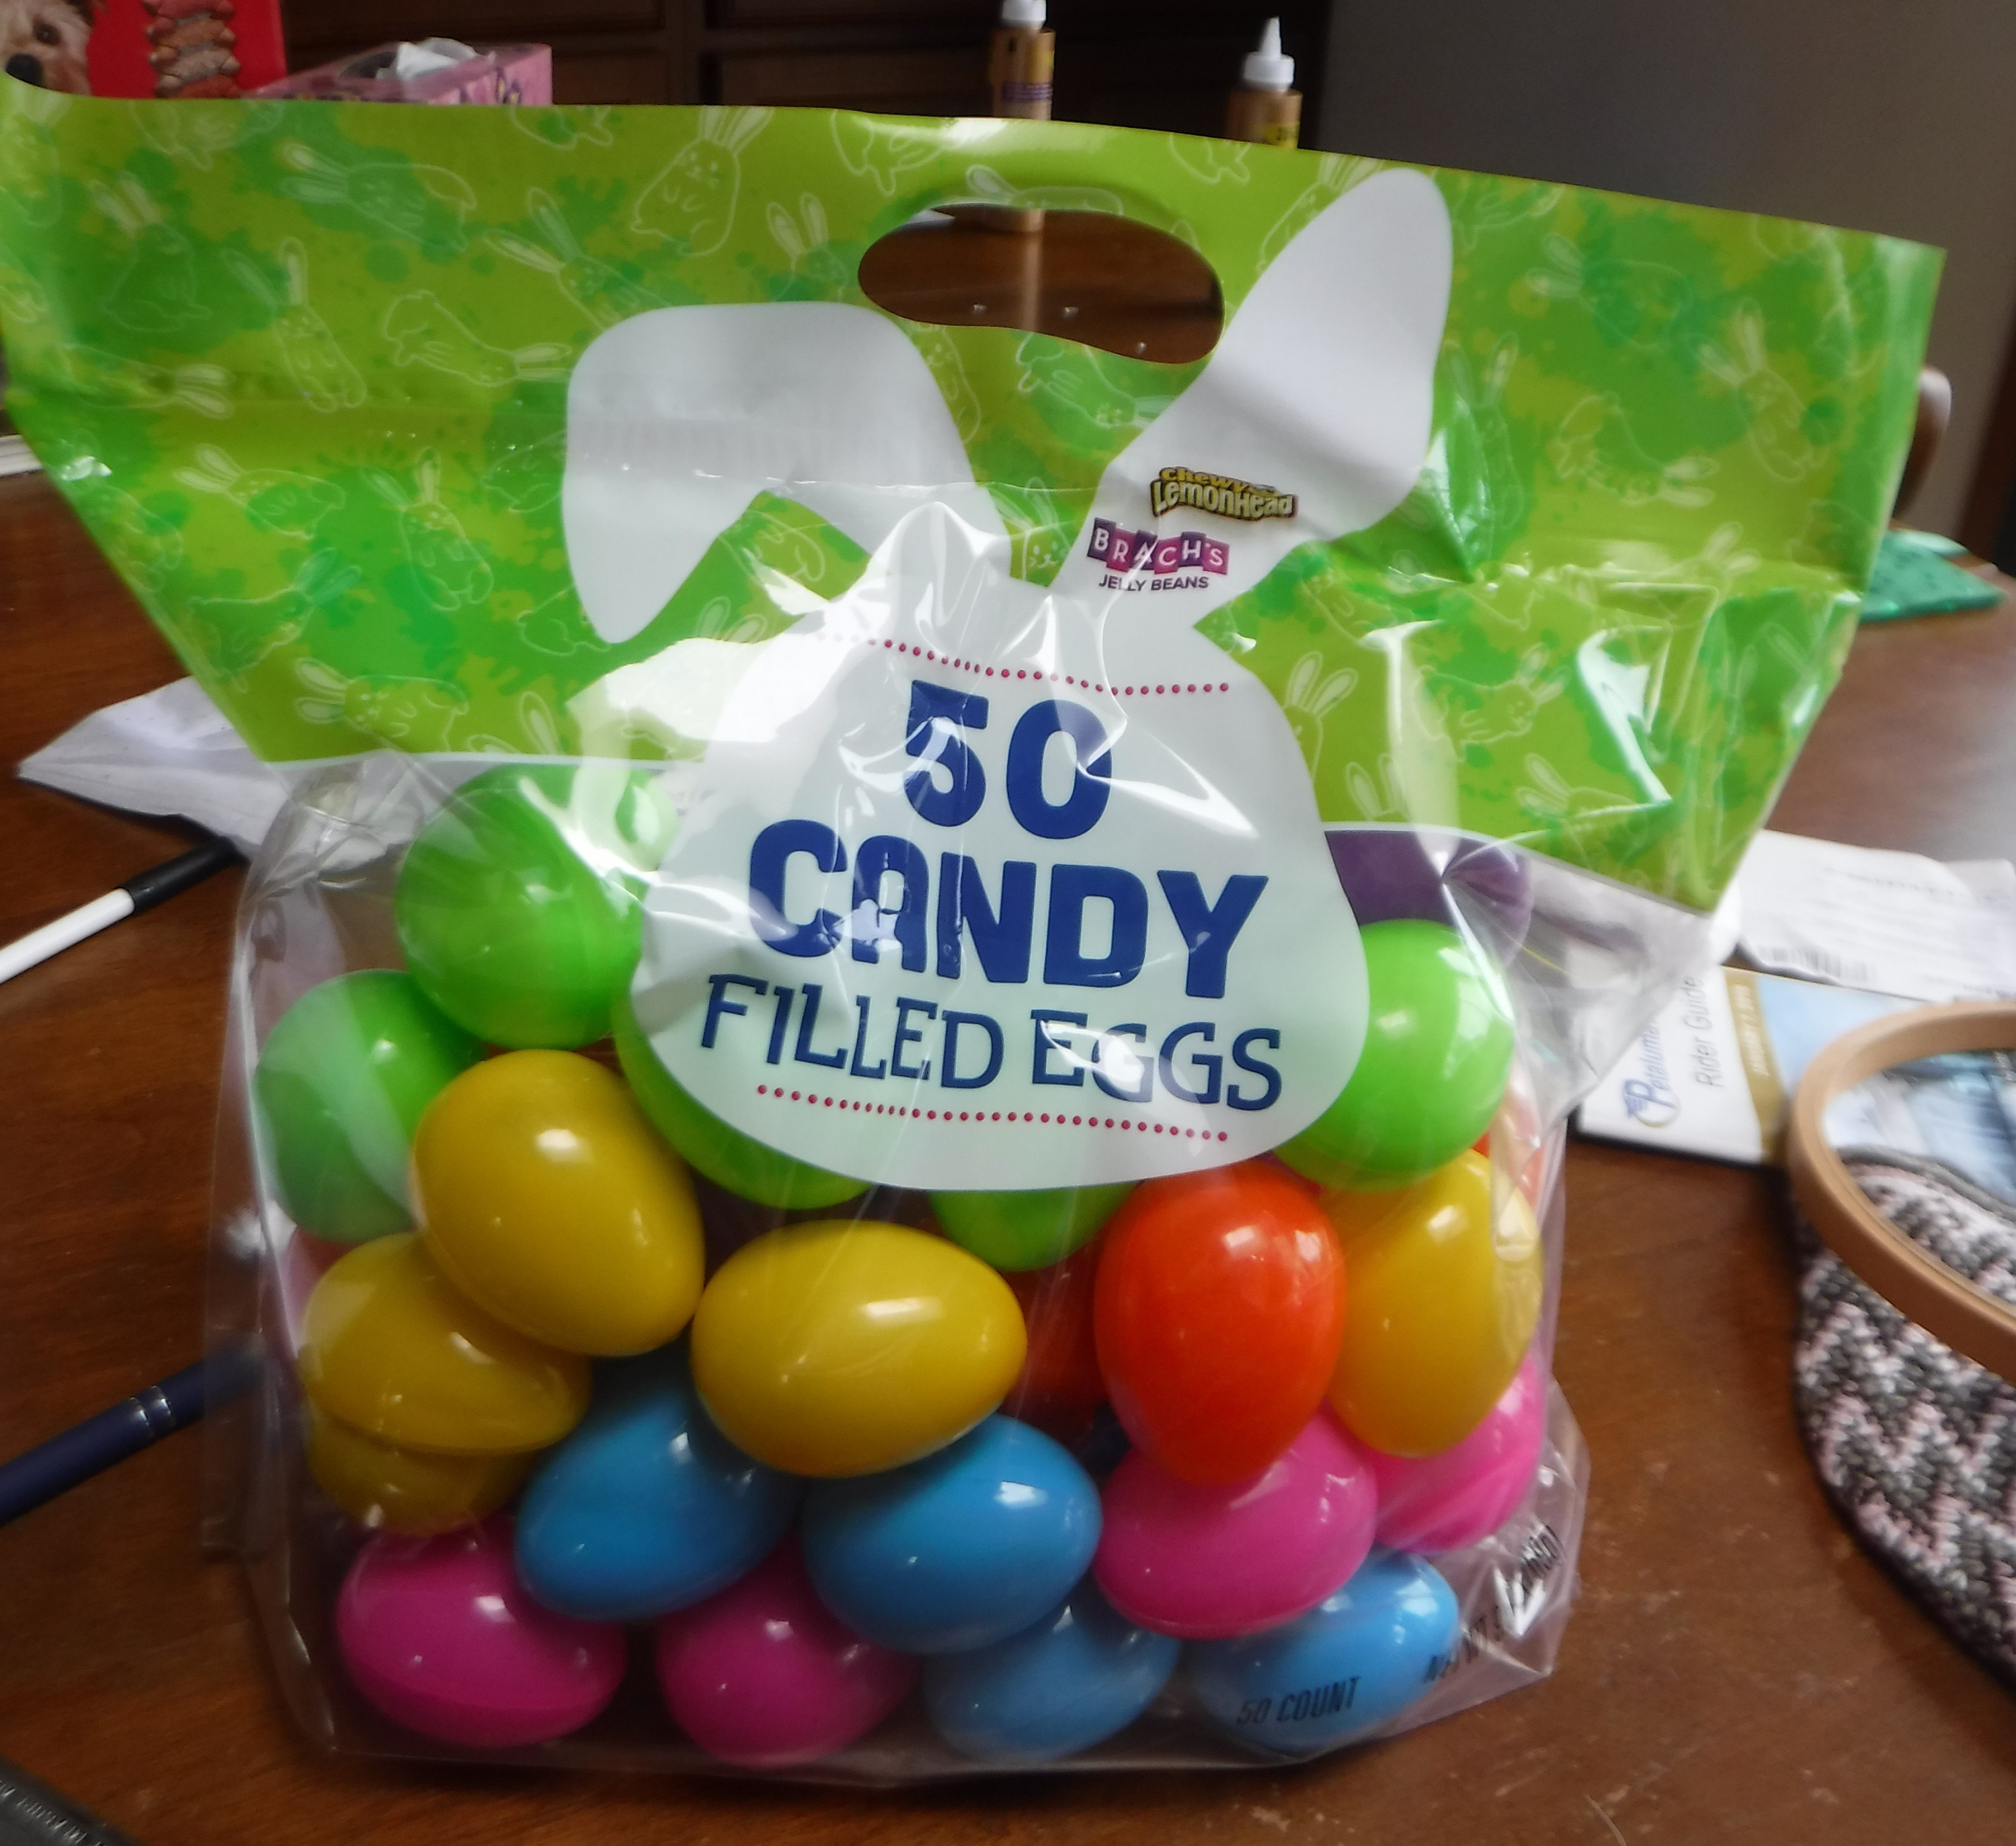 Photo I took of the bag of Easter eggs I bought while I was out. 